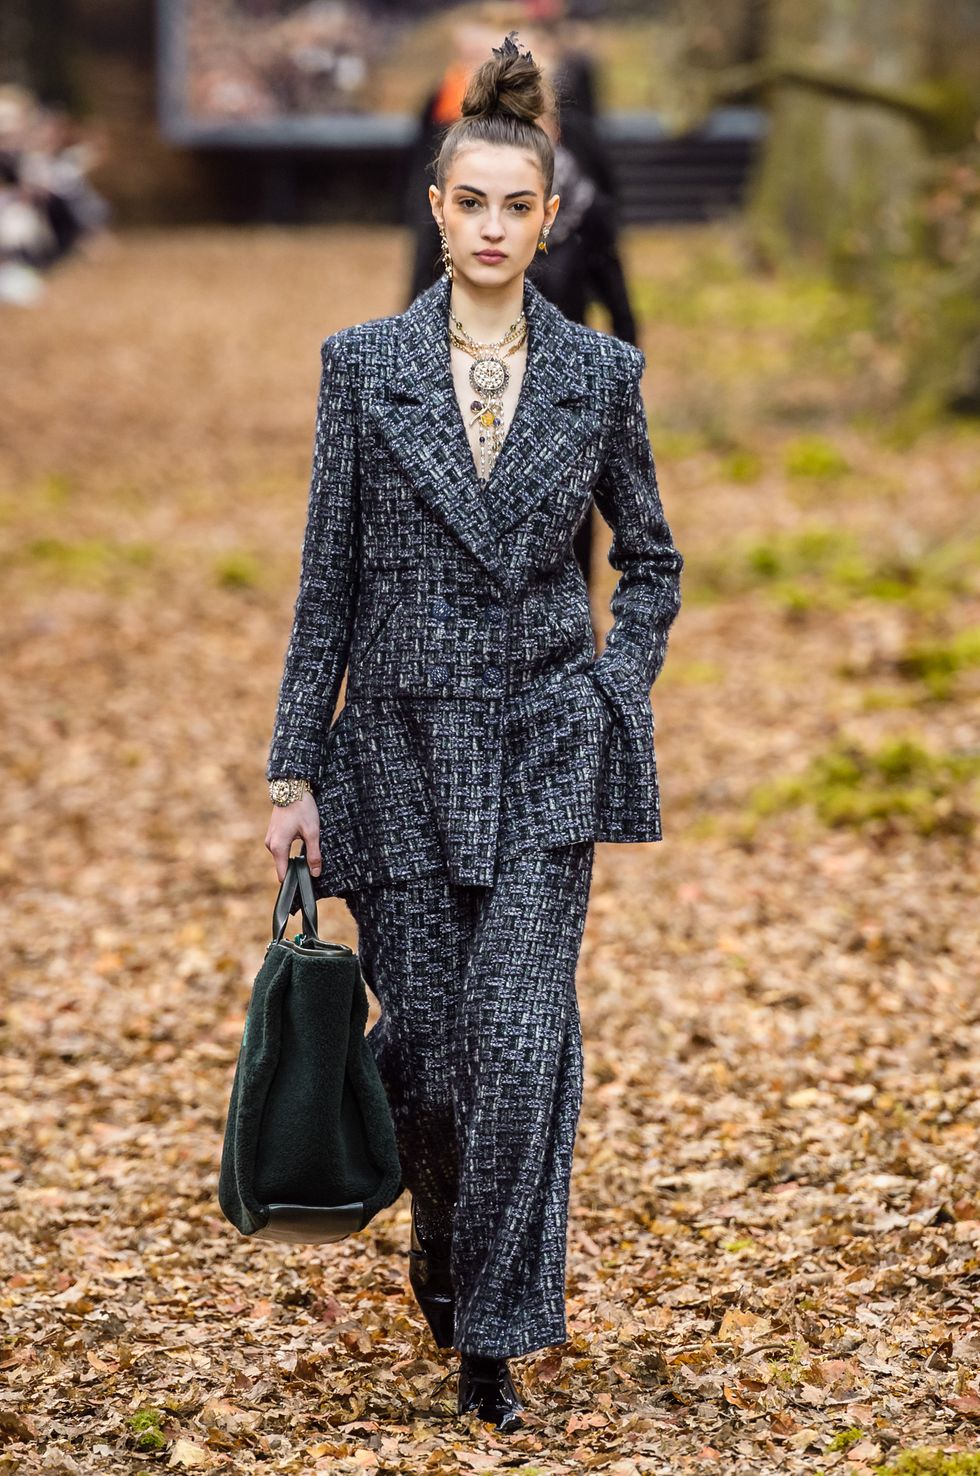 81 Looks From Chanel Fall 2018 PFW Show – Chanel Runway at Paris